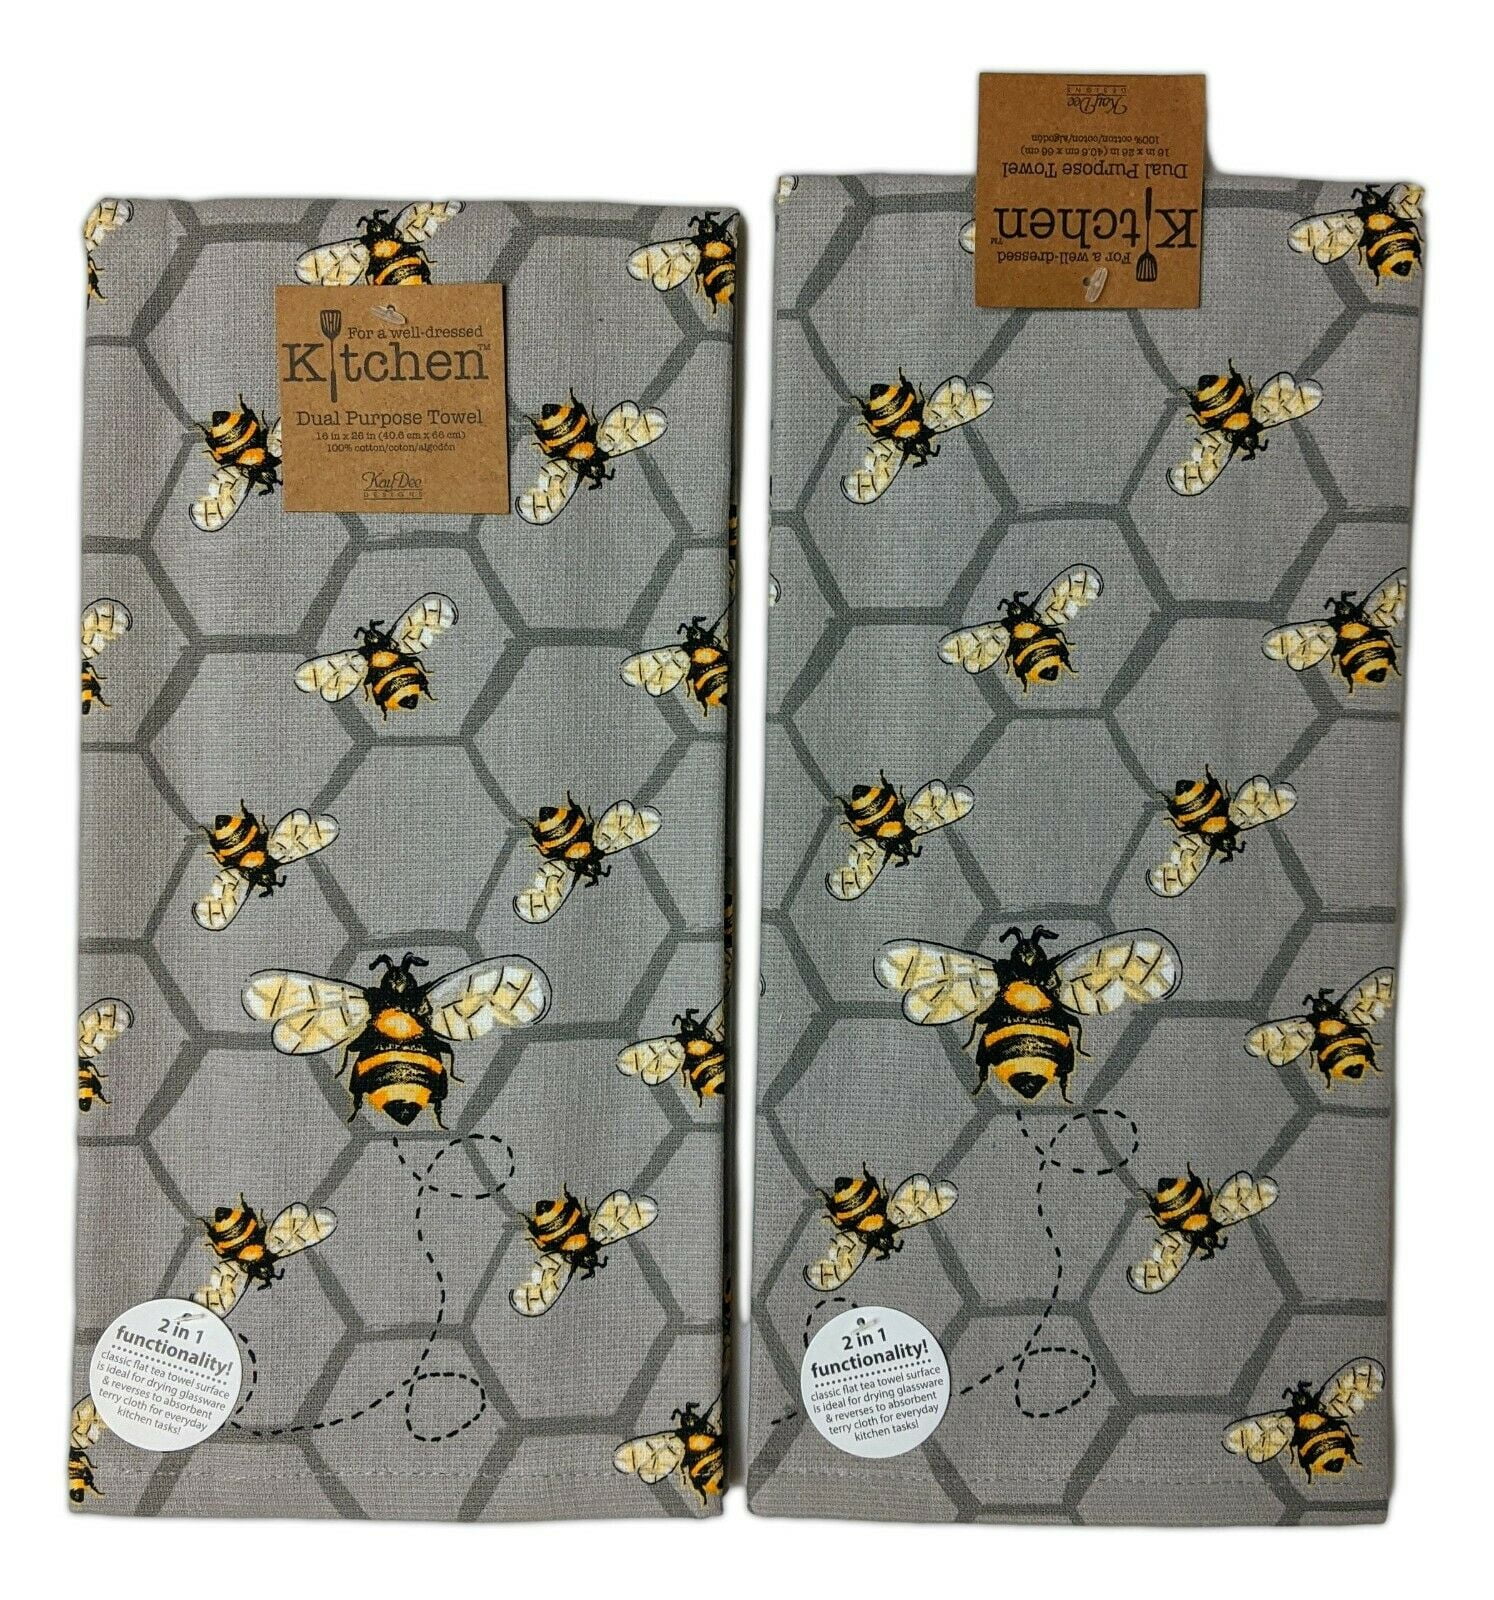 Details about   NWT June & December Honeycomb Yellow Bumble Bee Flour Sack Kitchen Towel Cotton! 